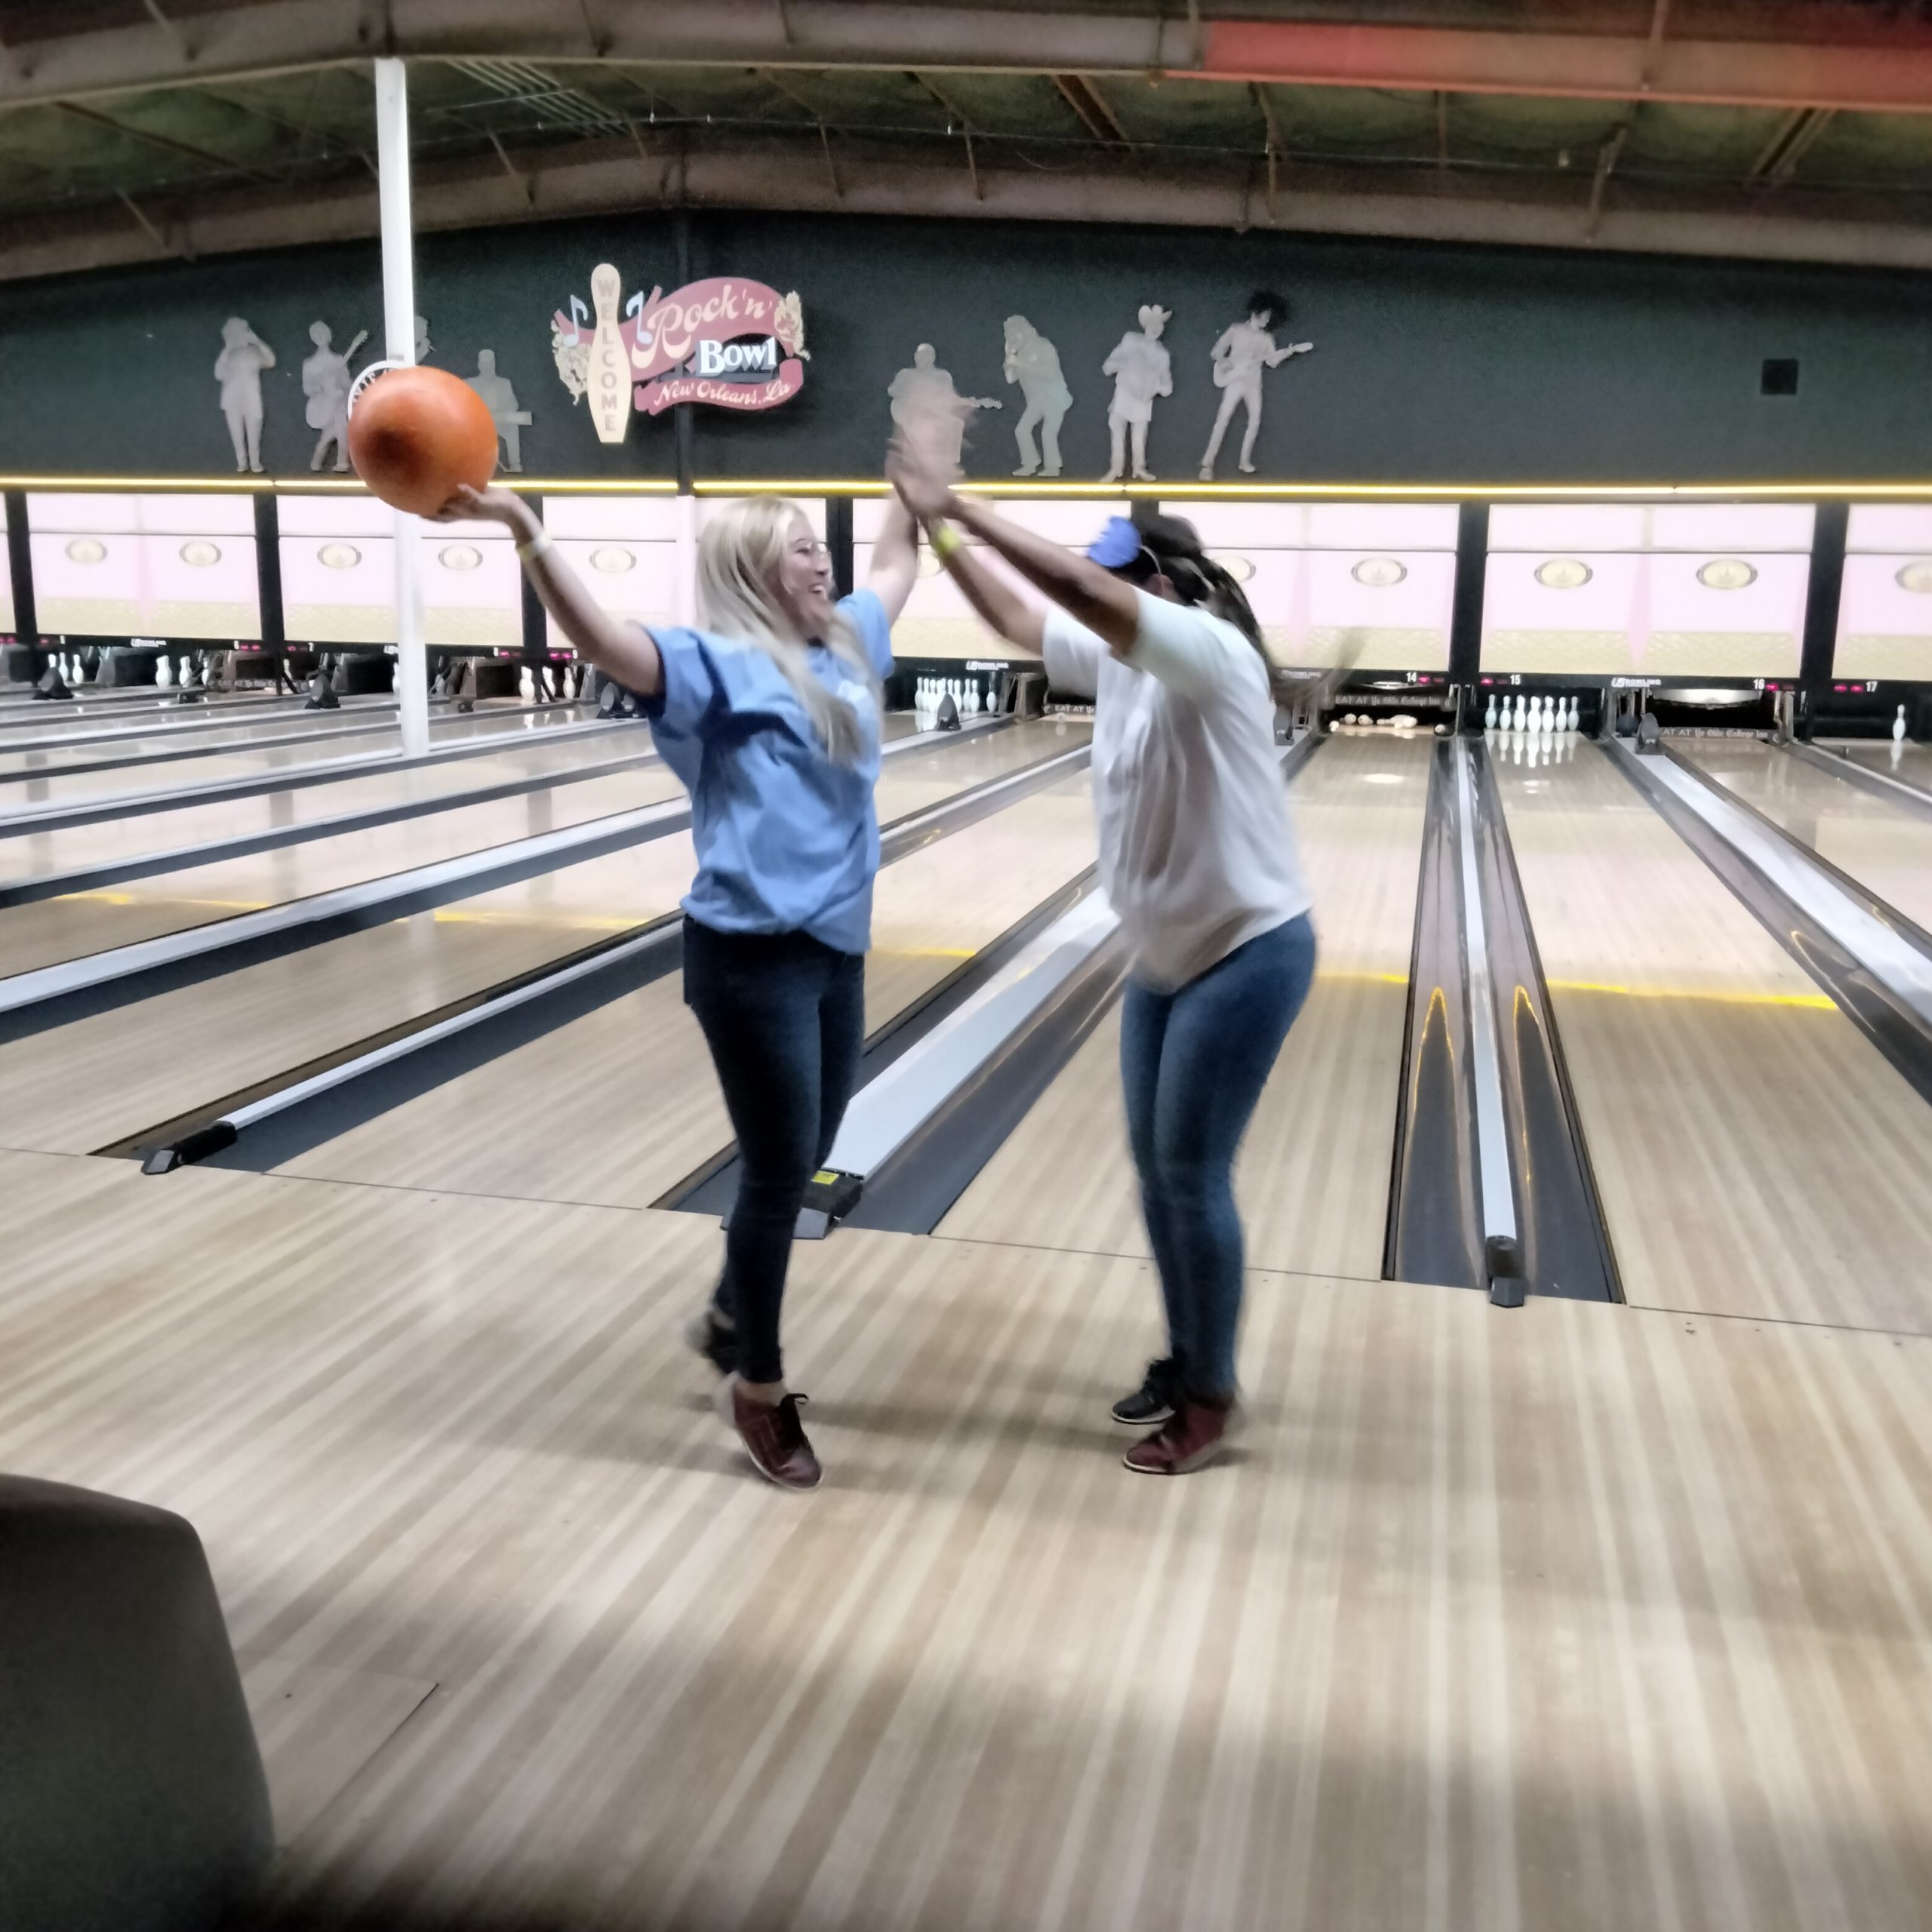 Bowlers at 2022 Strikes for Sight